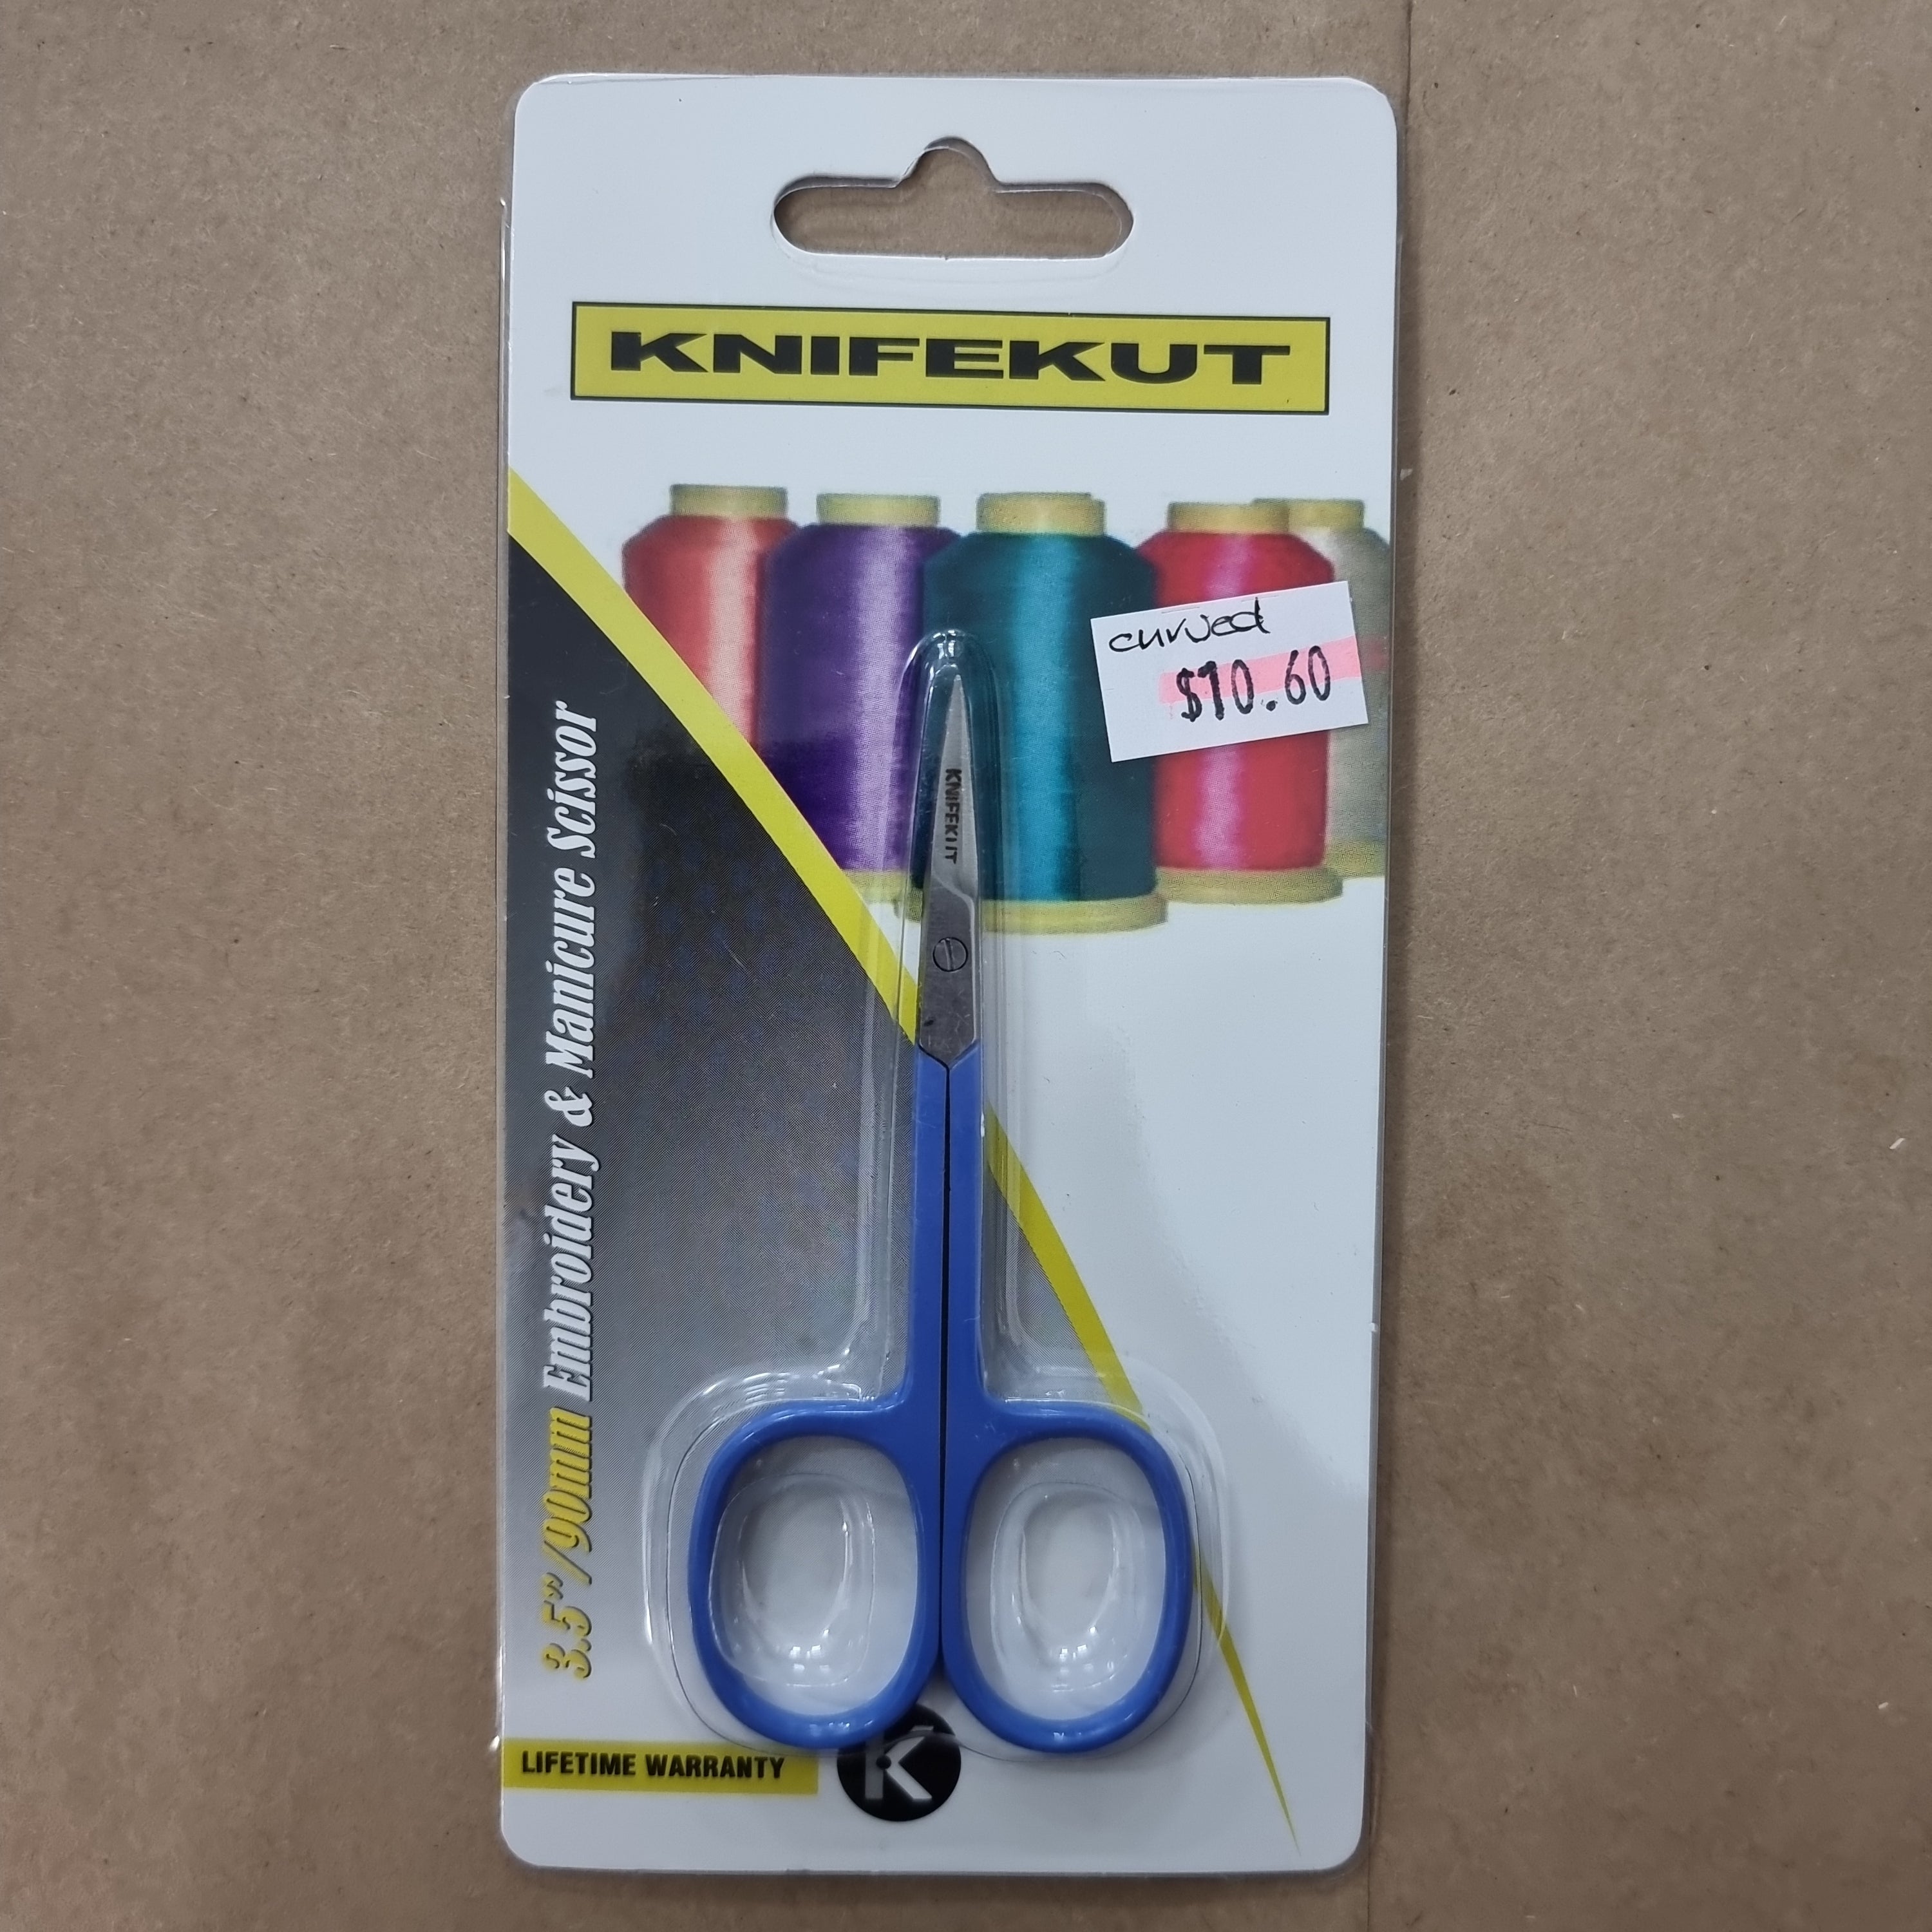 Knifekut Embroidery Curved Scissors